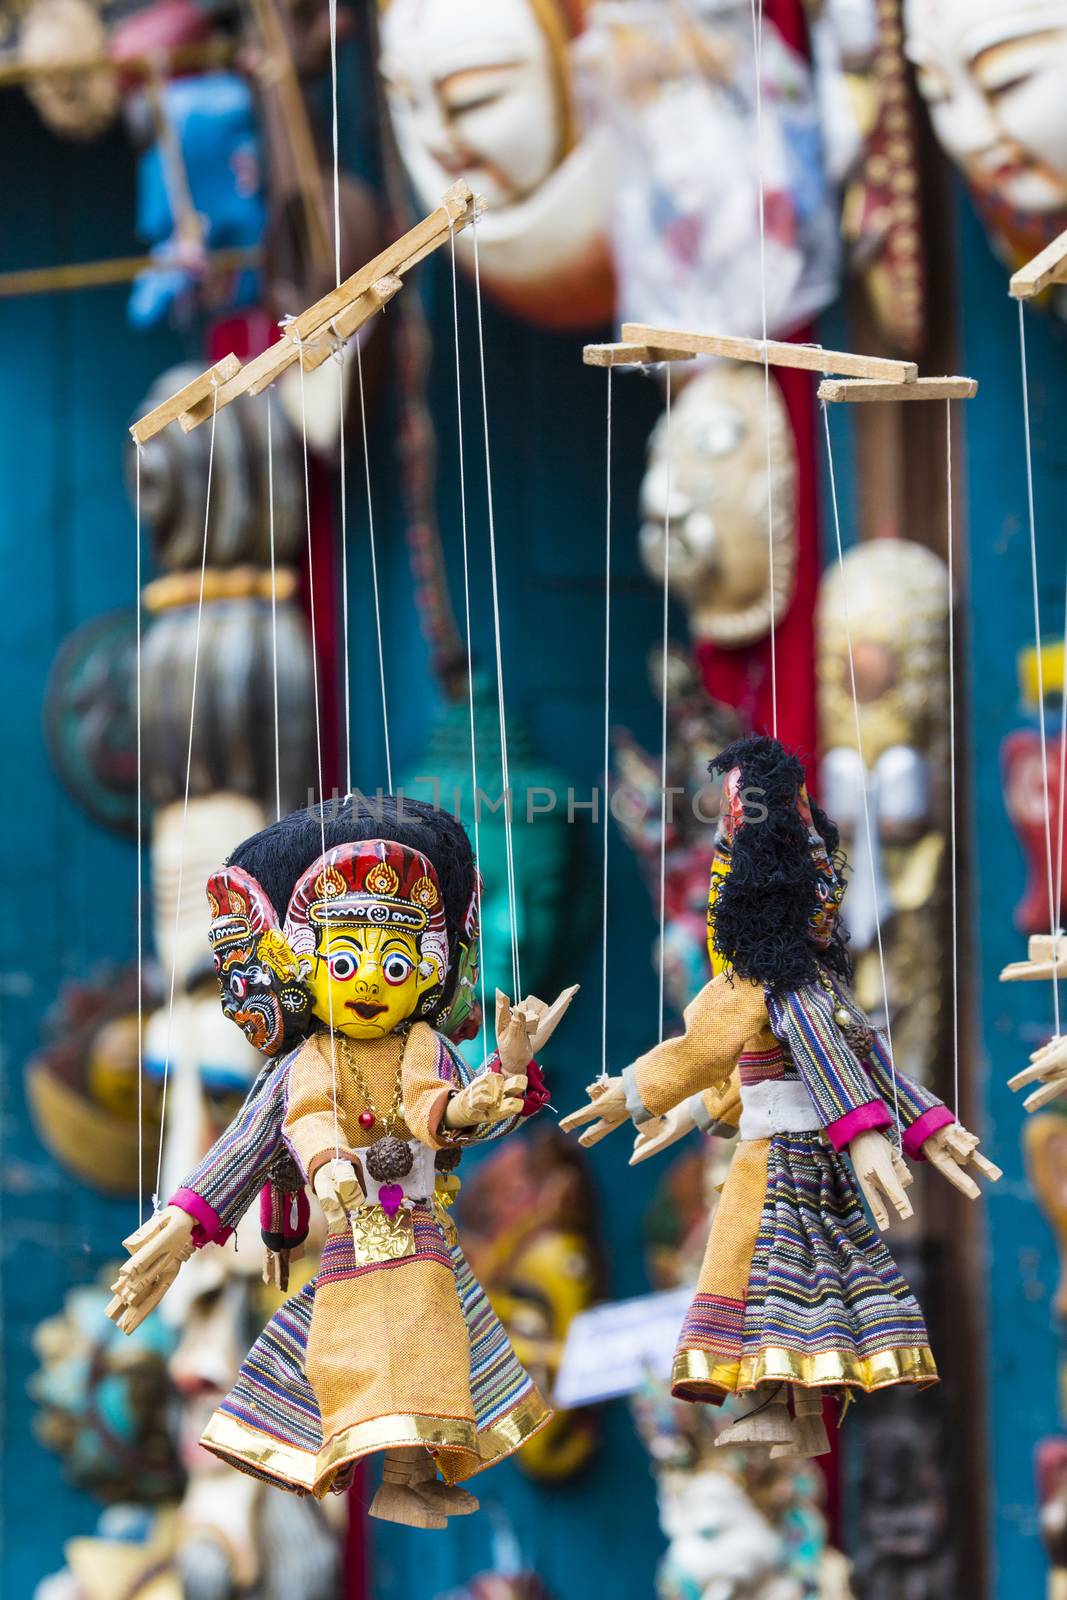 Masks, dolls and souvenirs in street shop at Durbar Square in Kathmandu, Nepal.